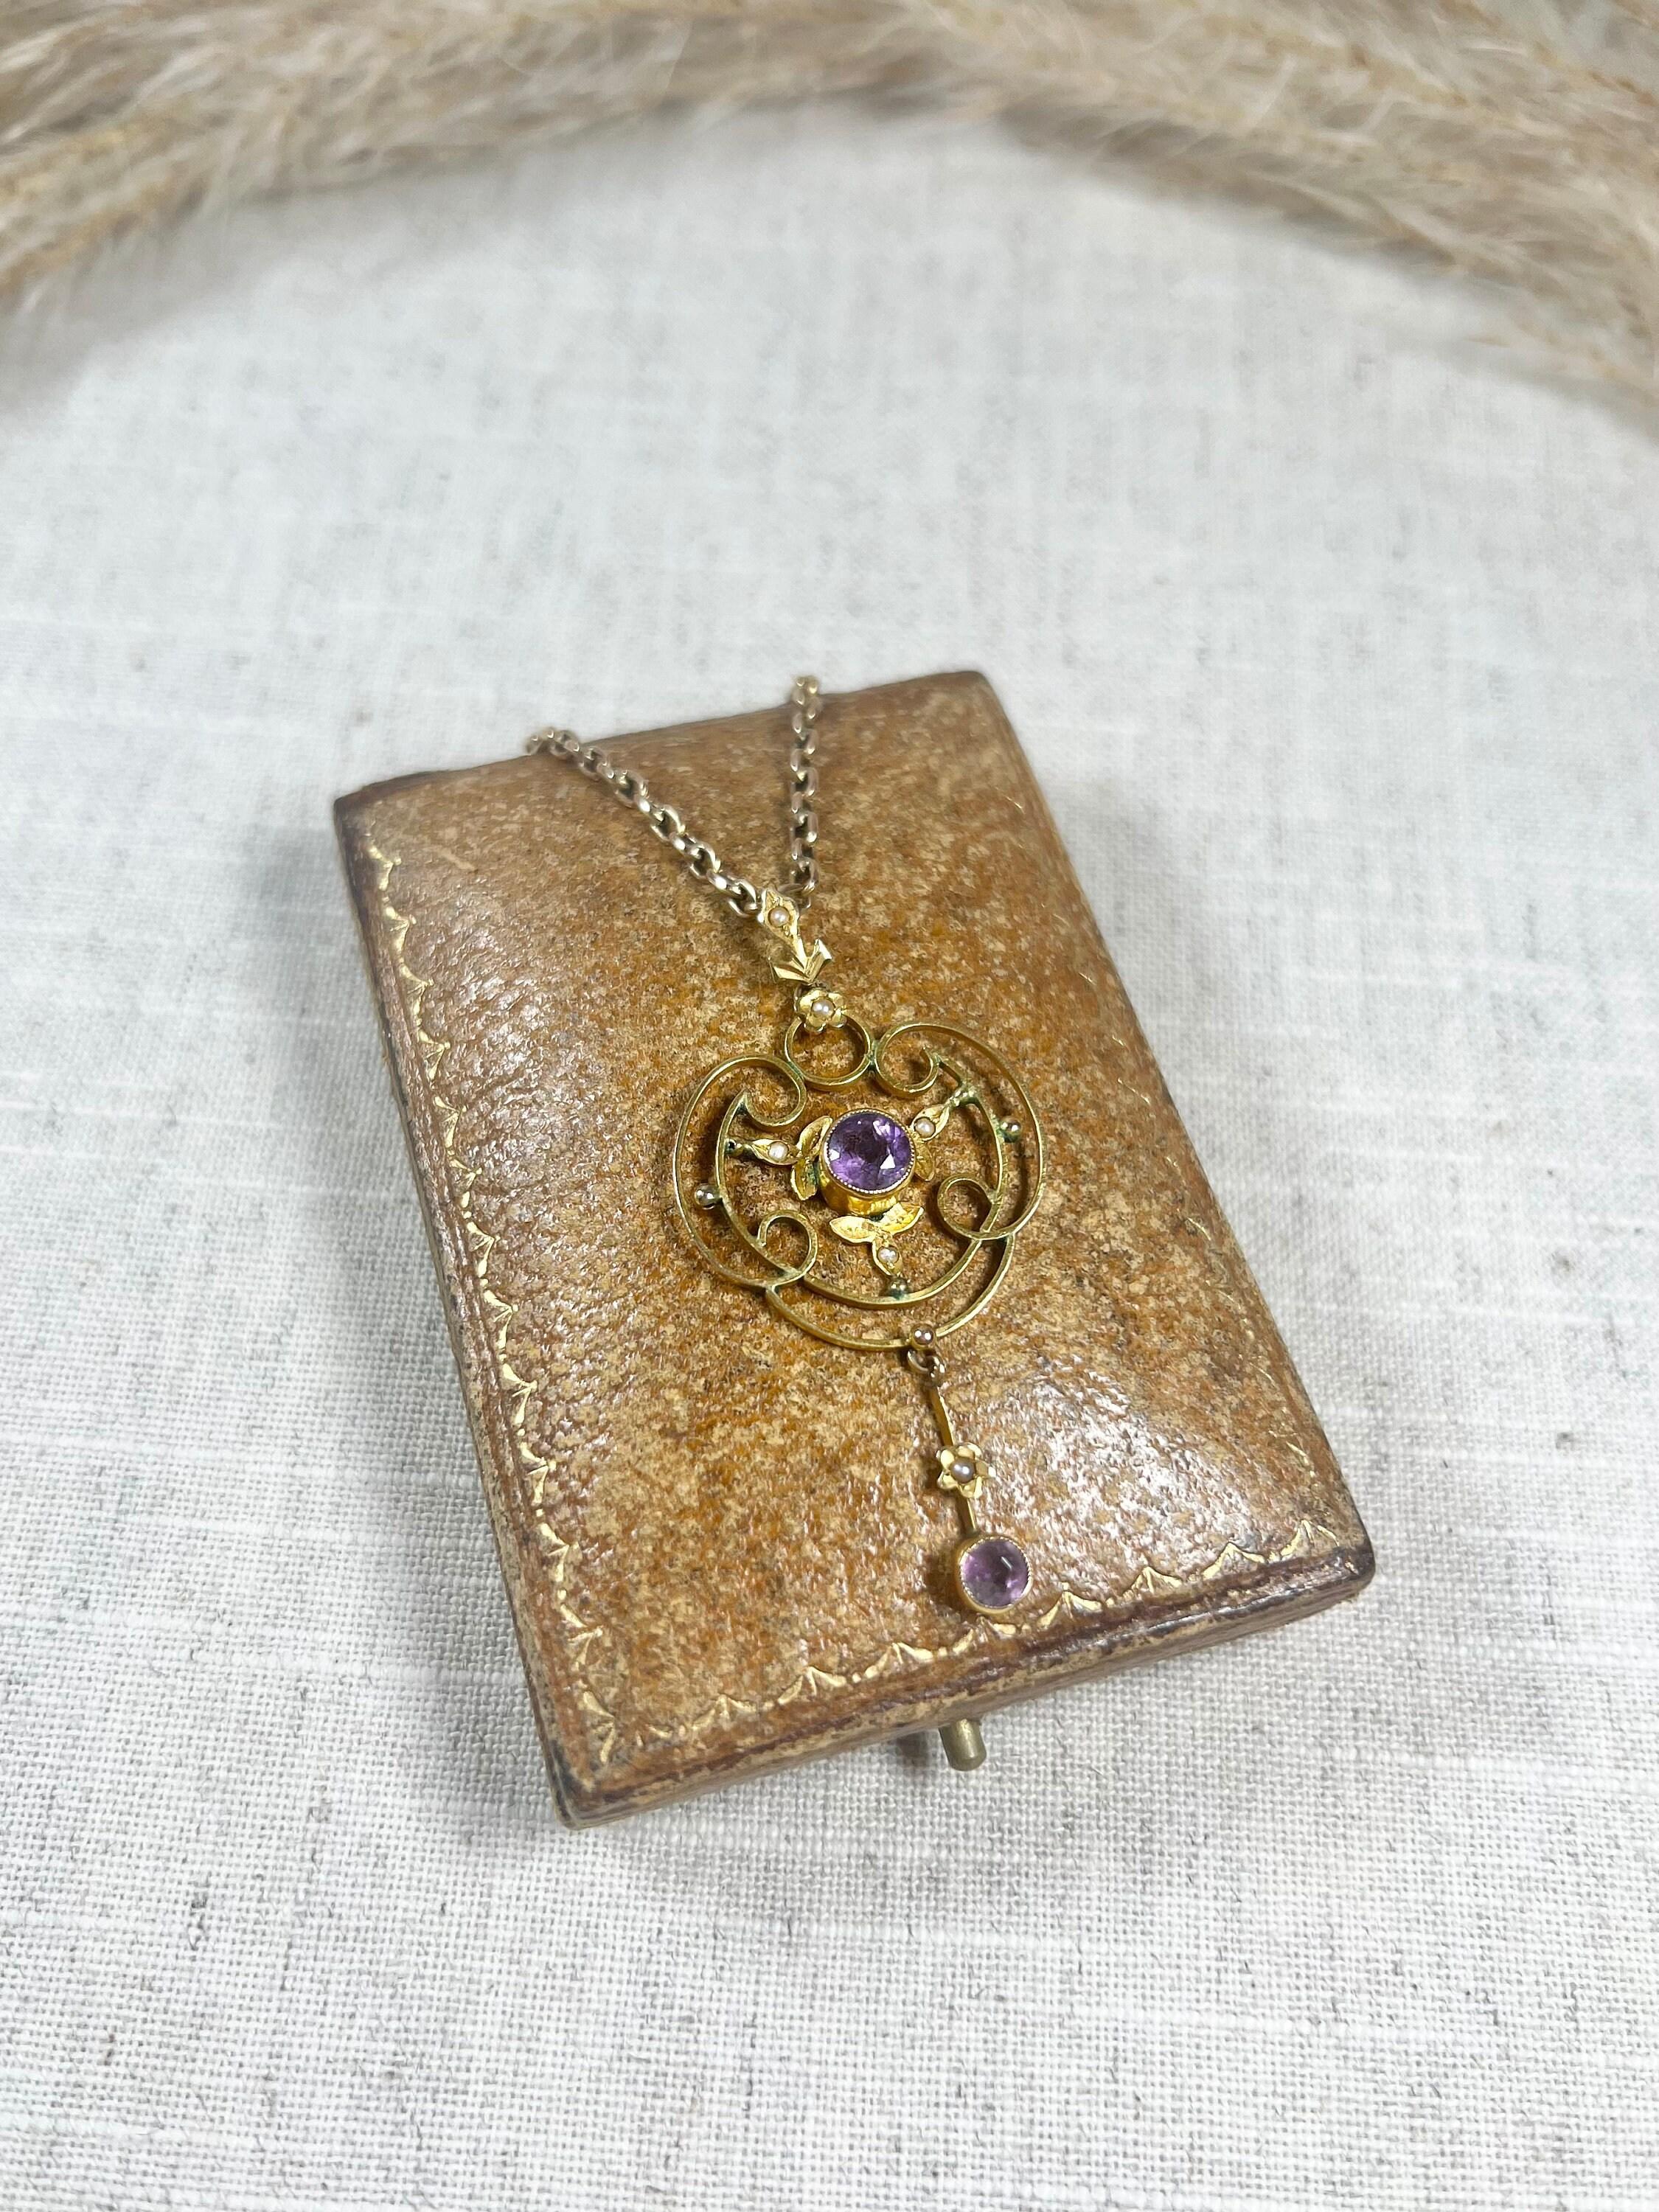 Antique Amethyst Pendant 

9ct Yellow Gold Tested

Circa 1900

This exquisite Edwardian pendant crafted from 9ct yellow gold is a true work of art. The open work design adds a delicate touch to this stunning piece of jewellery, while the central,